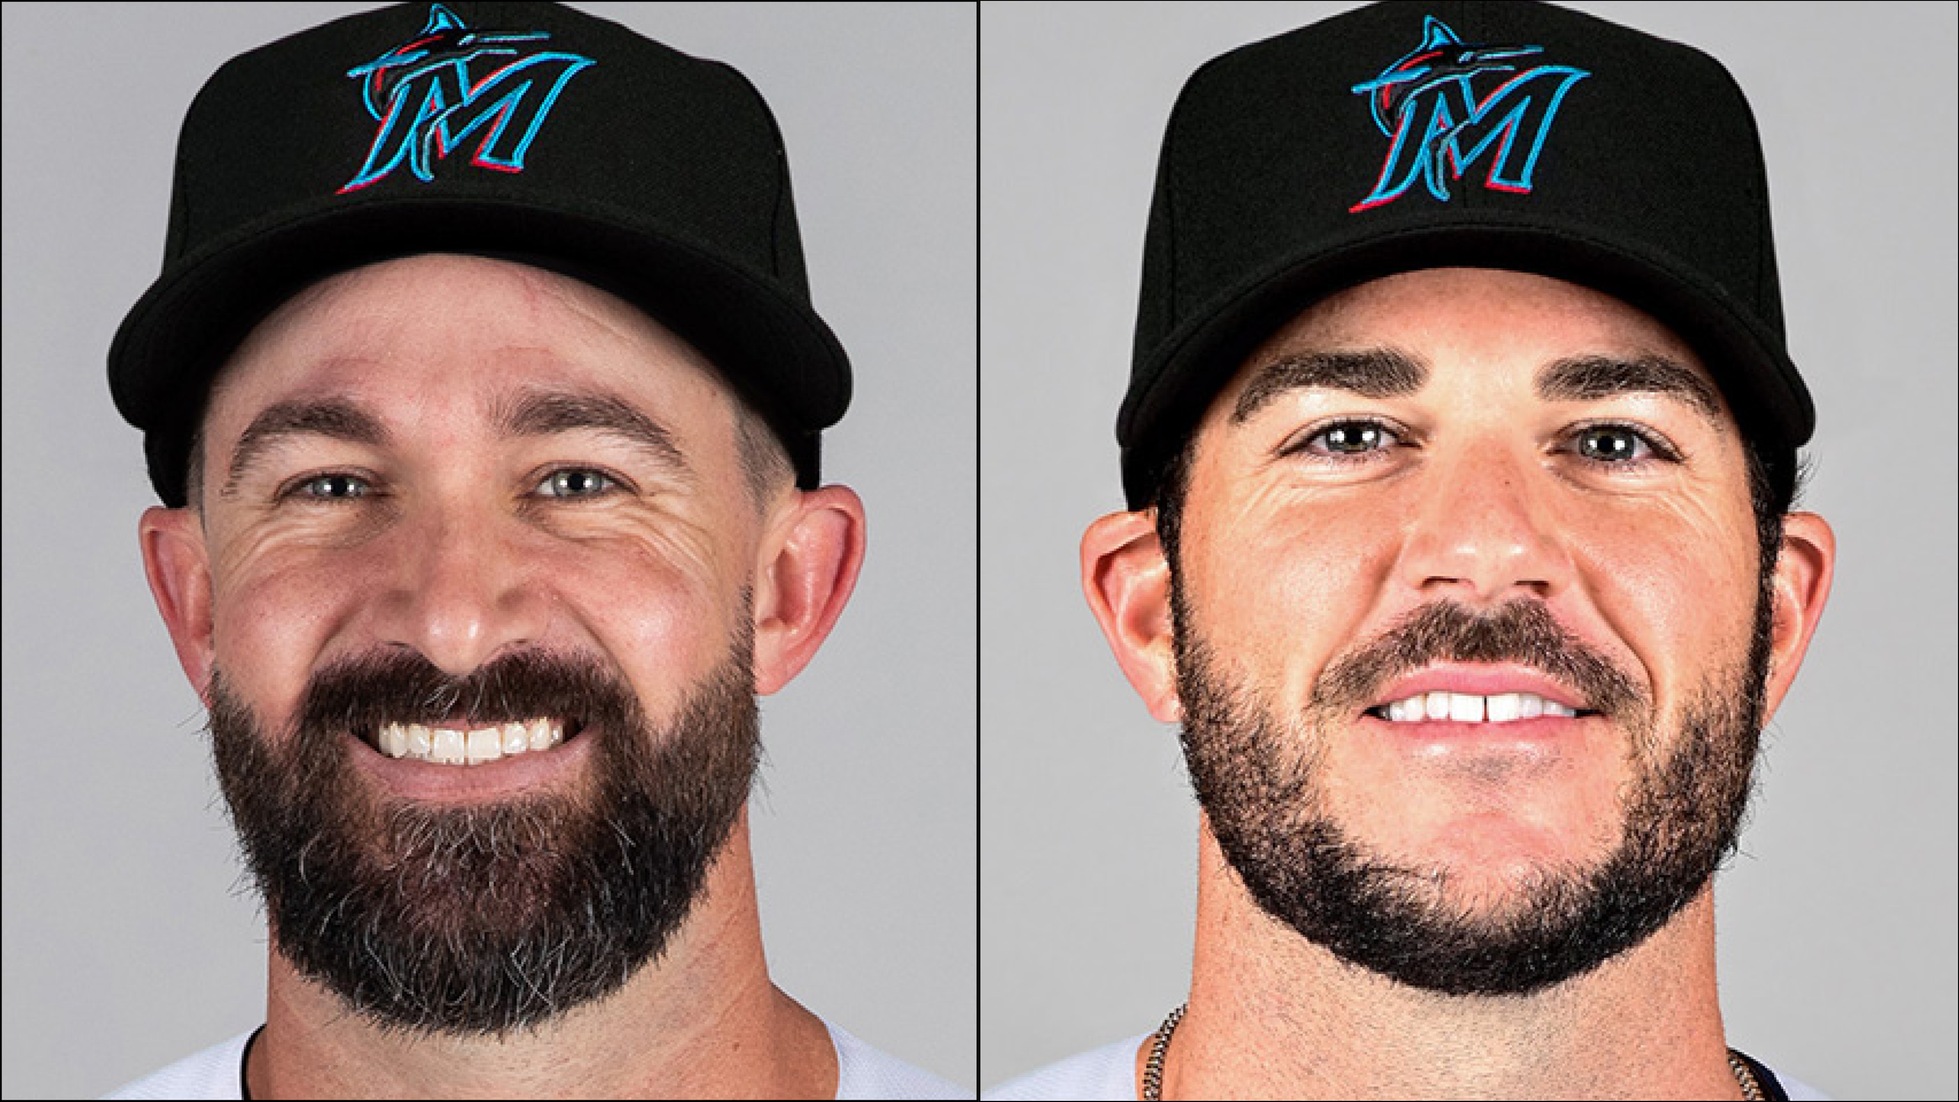 Nick Vincent (left) and James Hoyt played together at Palomar in 2007 and have since been reunited in the big leagues playing for the Miami Marlins. Photos: mlb.com